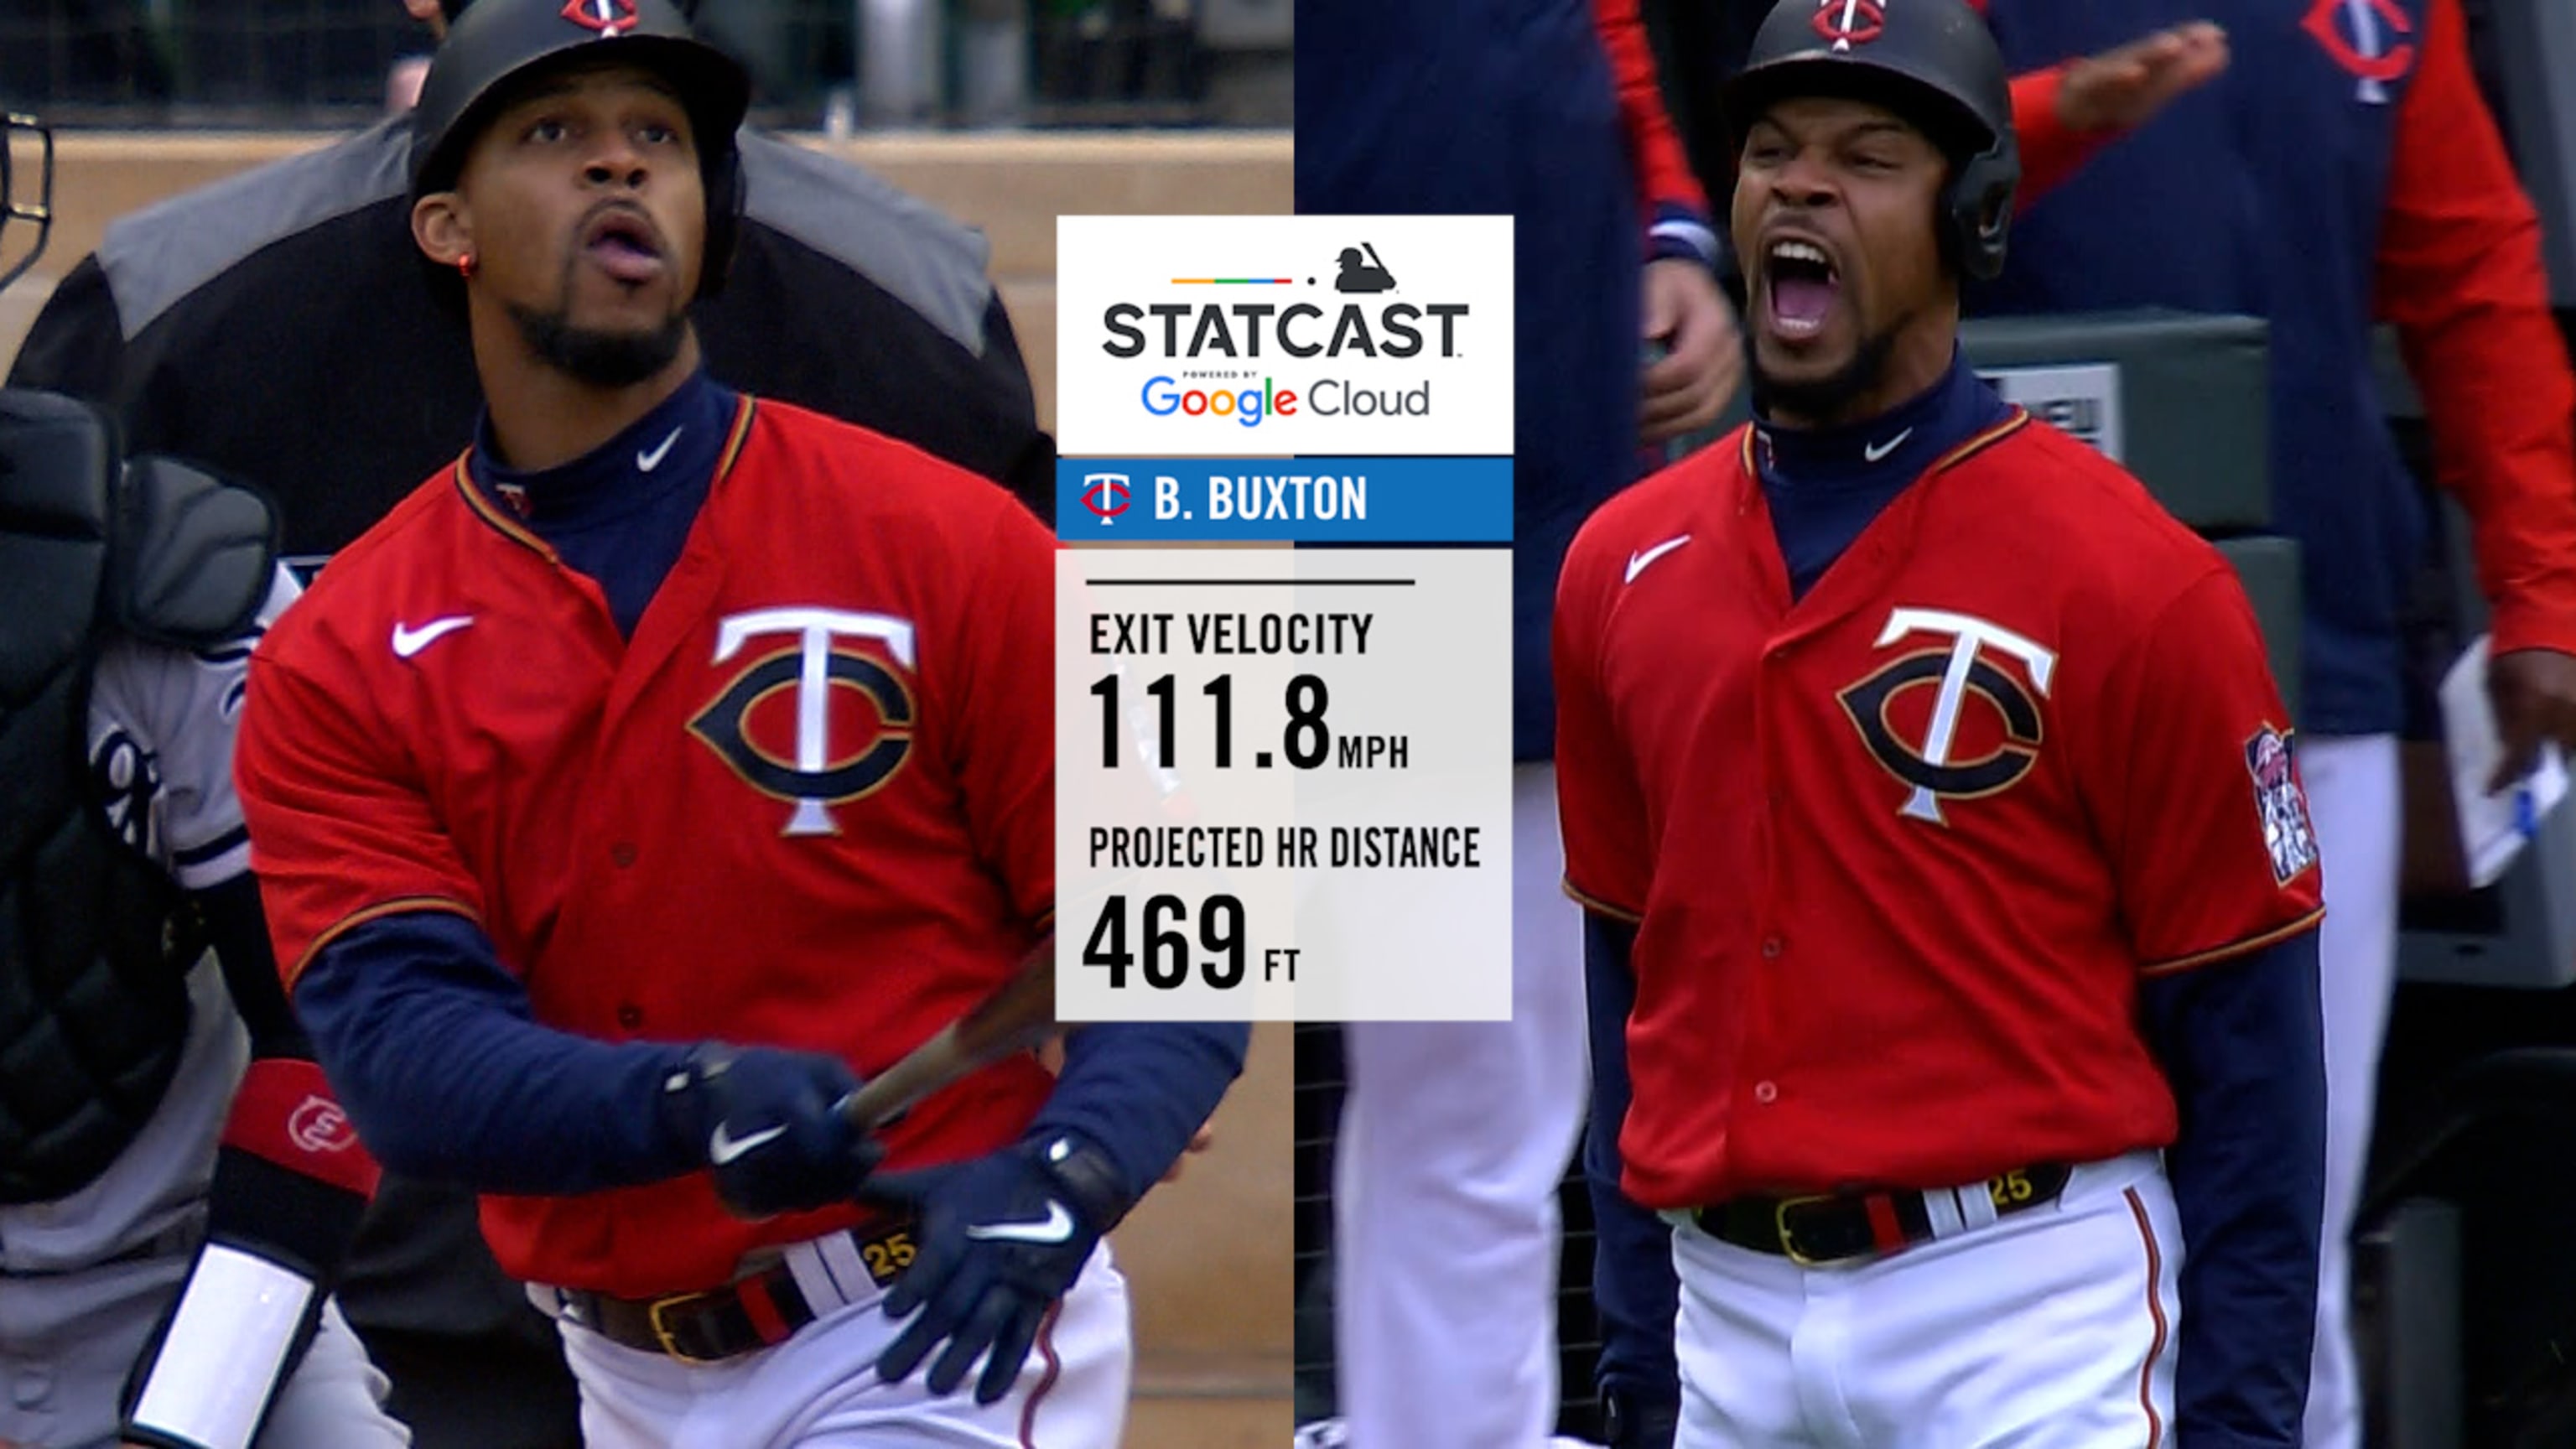 Twins' Byron Buxton has been one of baseball's best hitters in